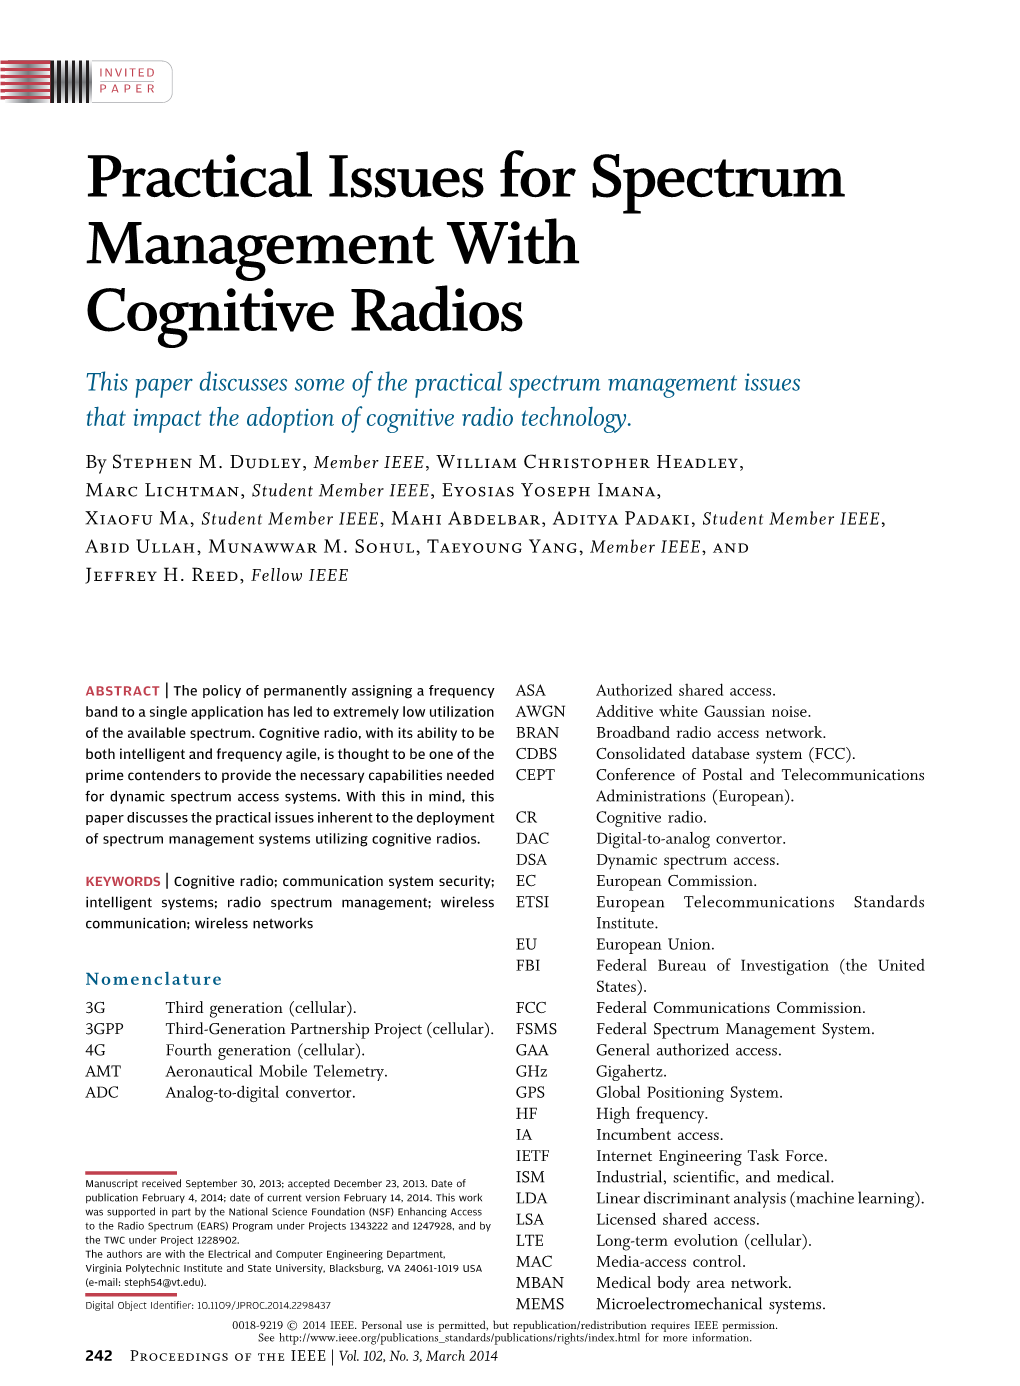 Practical Issues for Spectrum Management with Cognitive Radios